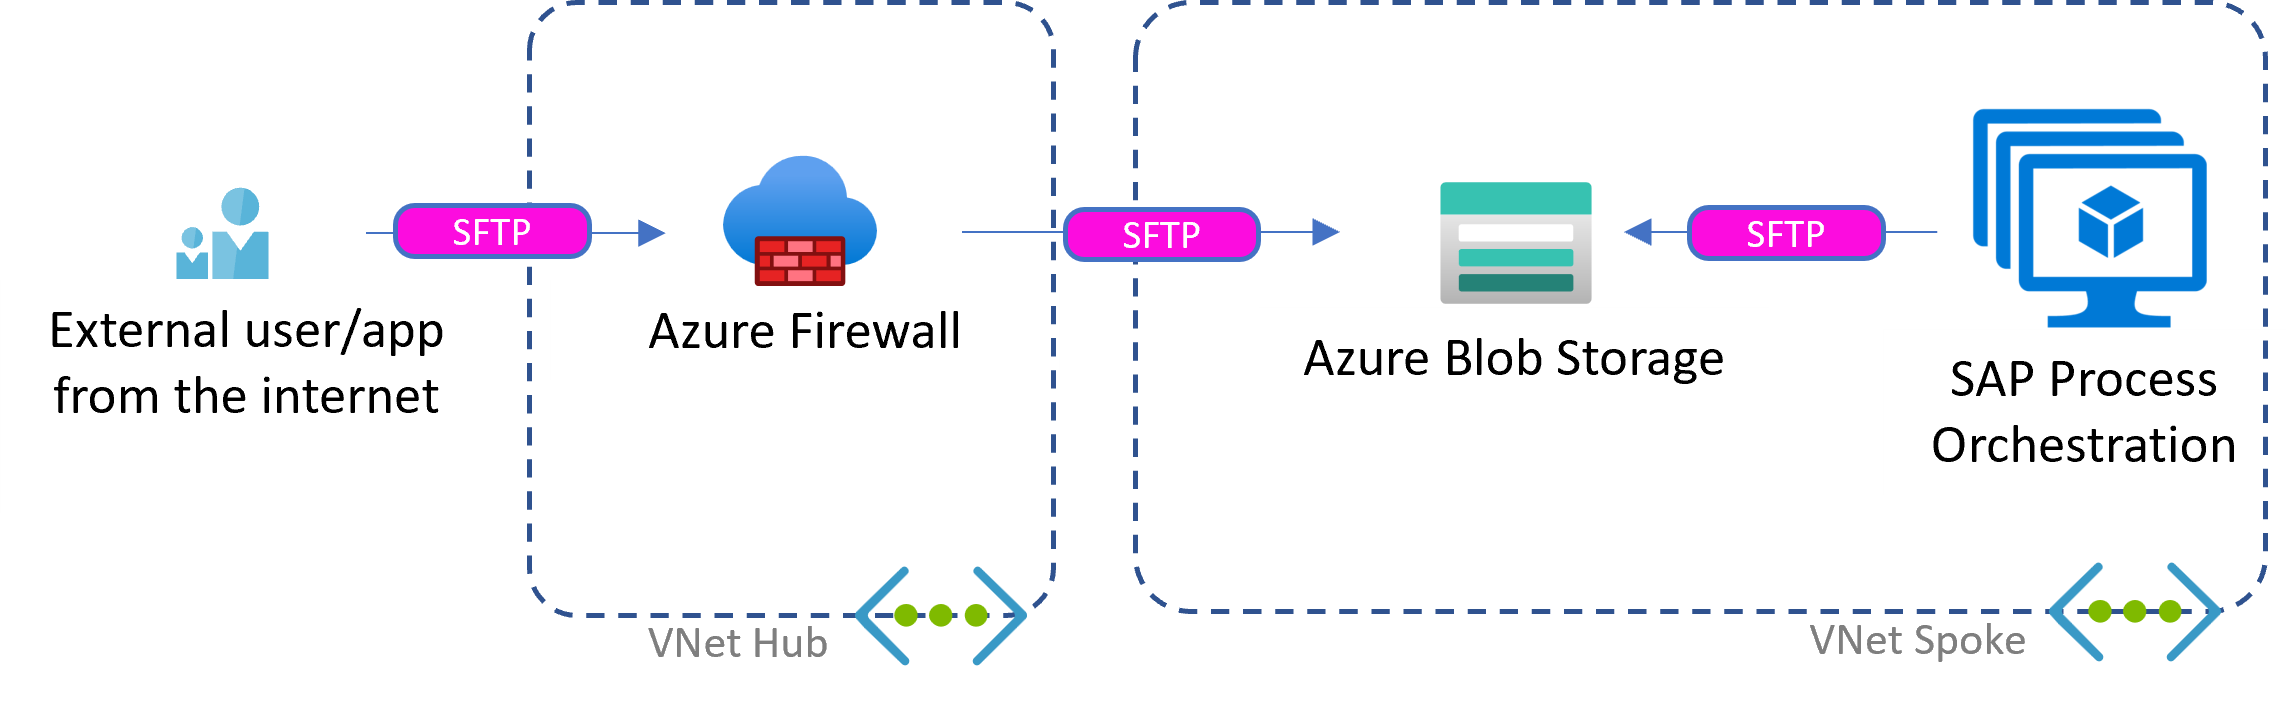 Diagram that shows a file-based scenario with Azure Blob Storage and SAP Process Orchestration on Azure.